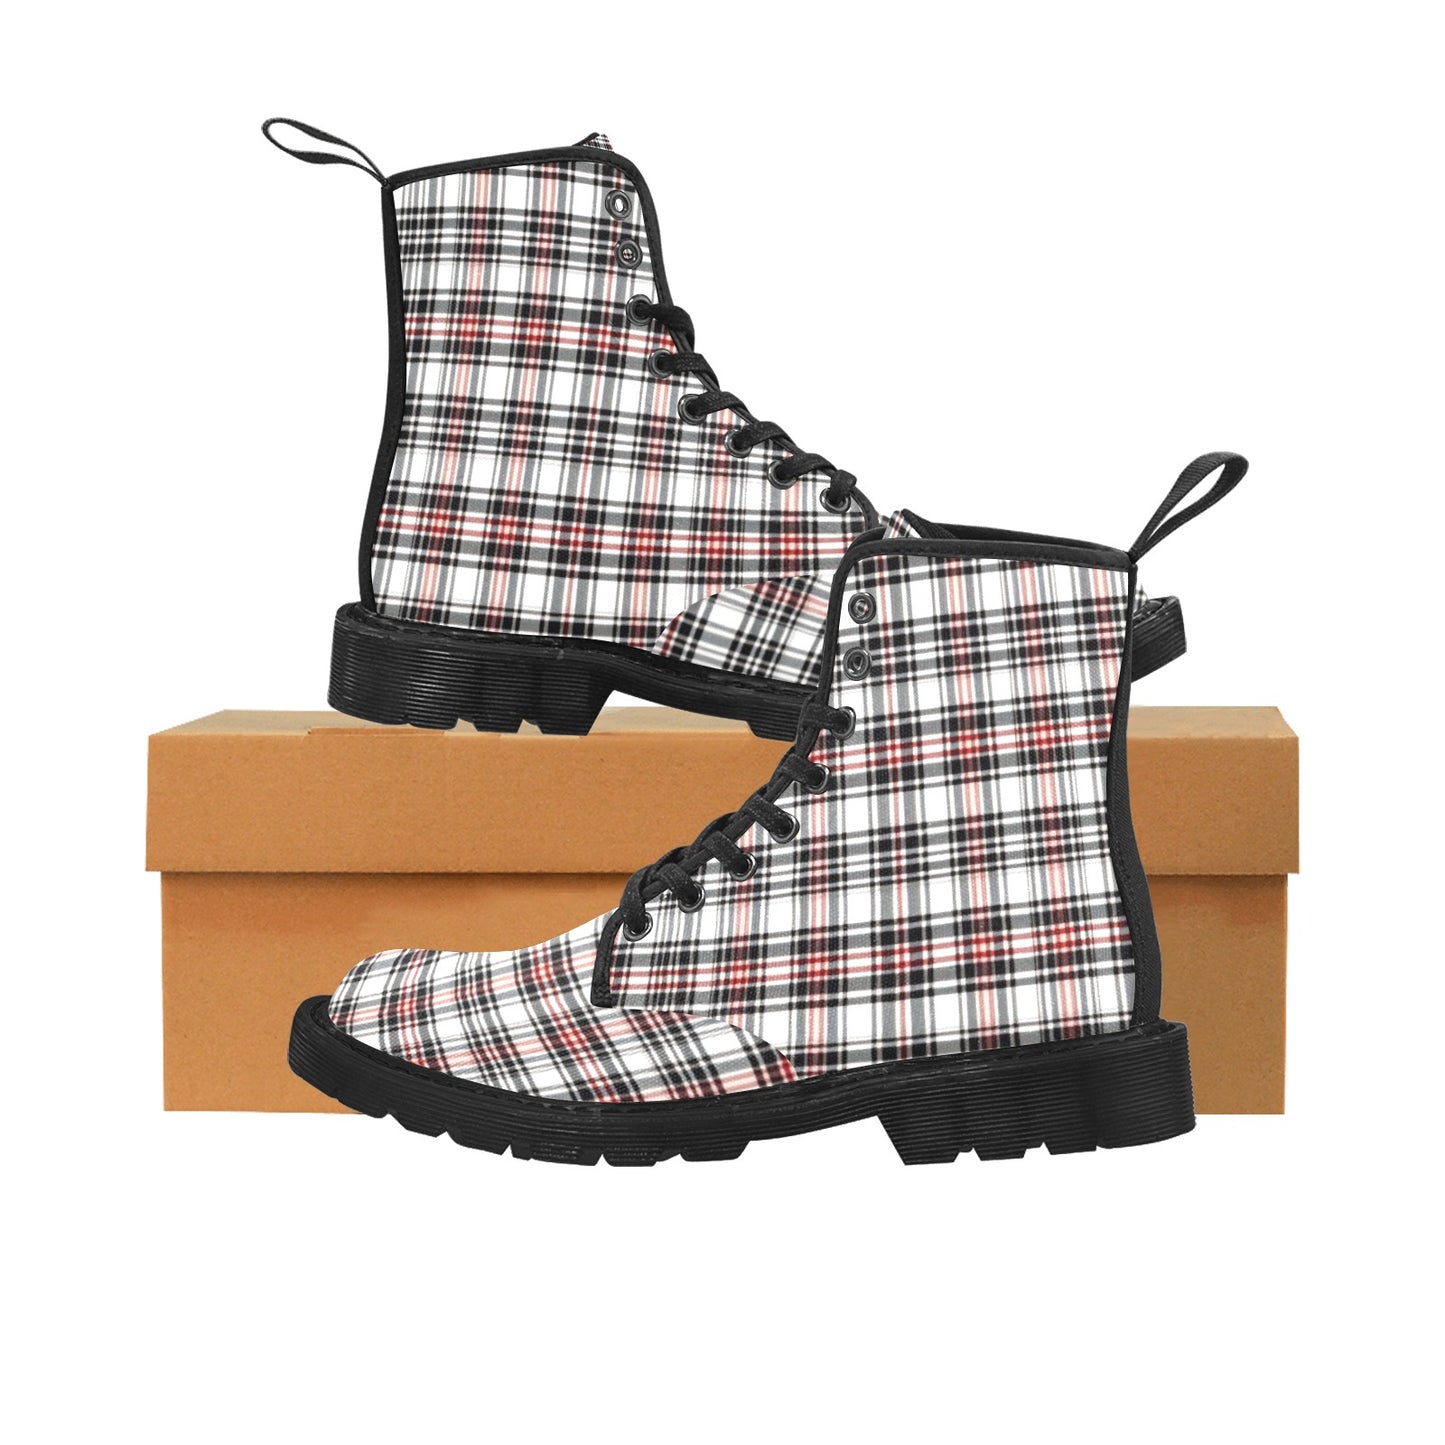 White Red Plaid Women's Boots, Black Check Tartan Vegan Canvas Lace Up Shoes Print Army Combat Winter Casual Lightweight Designer Starcove Fashion